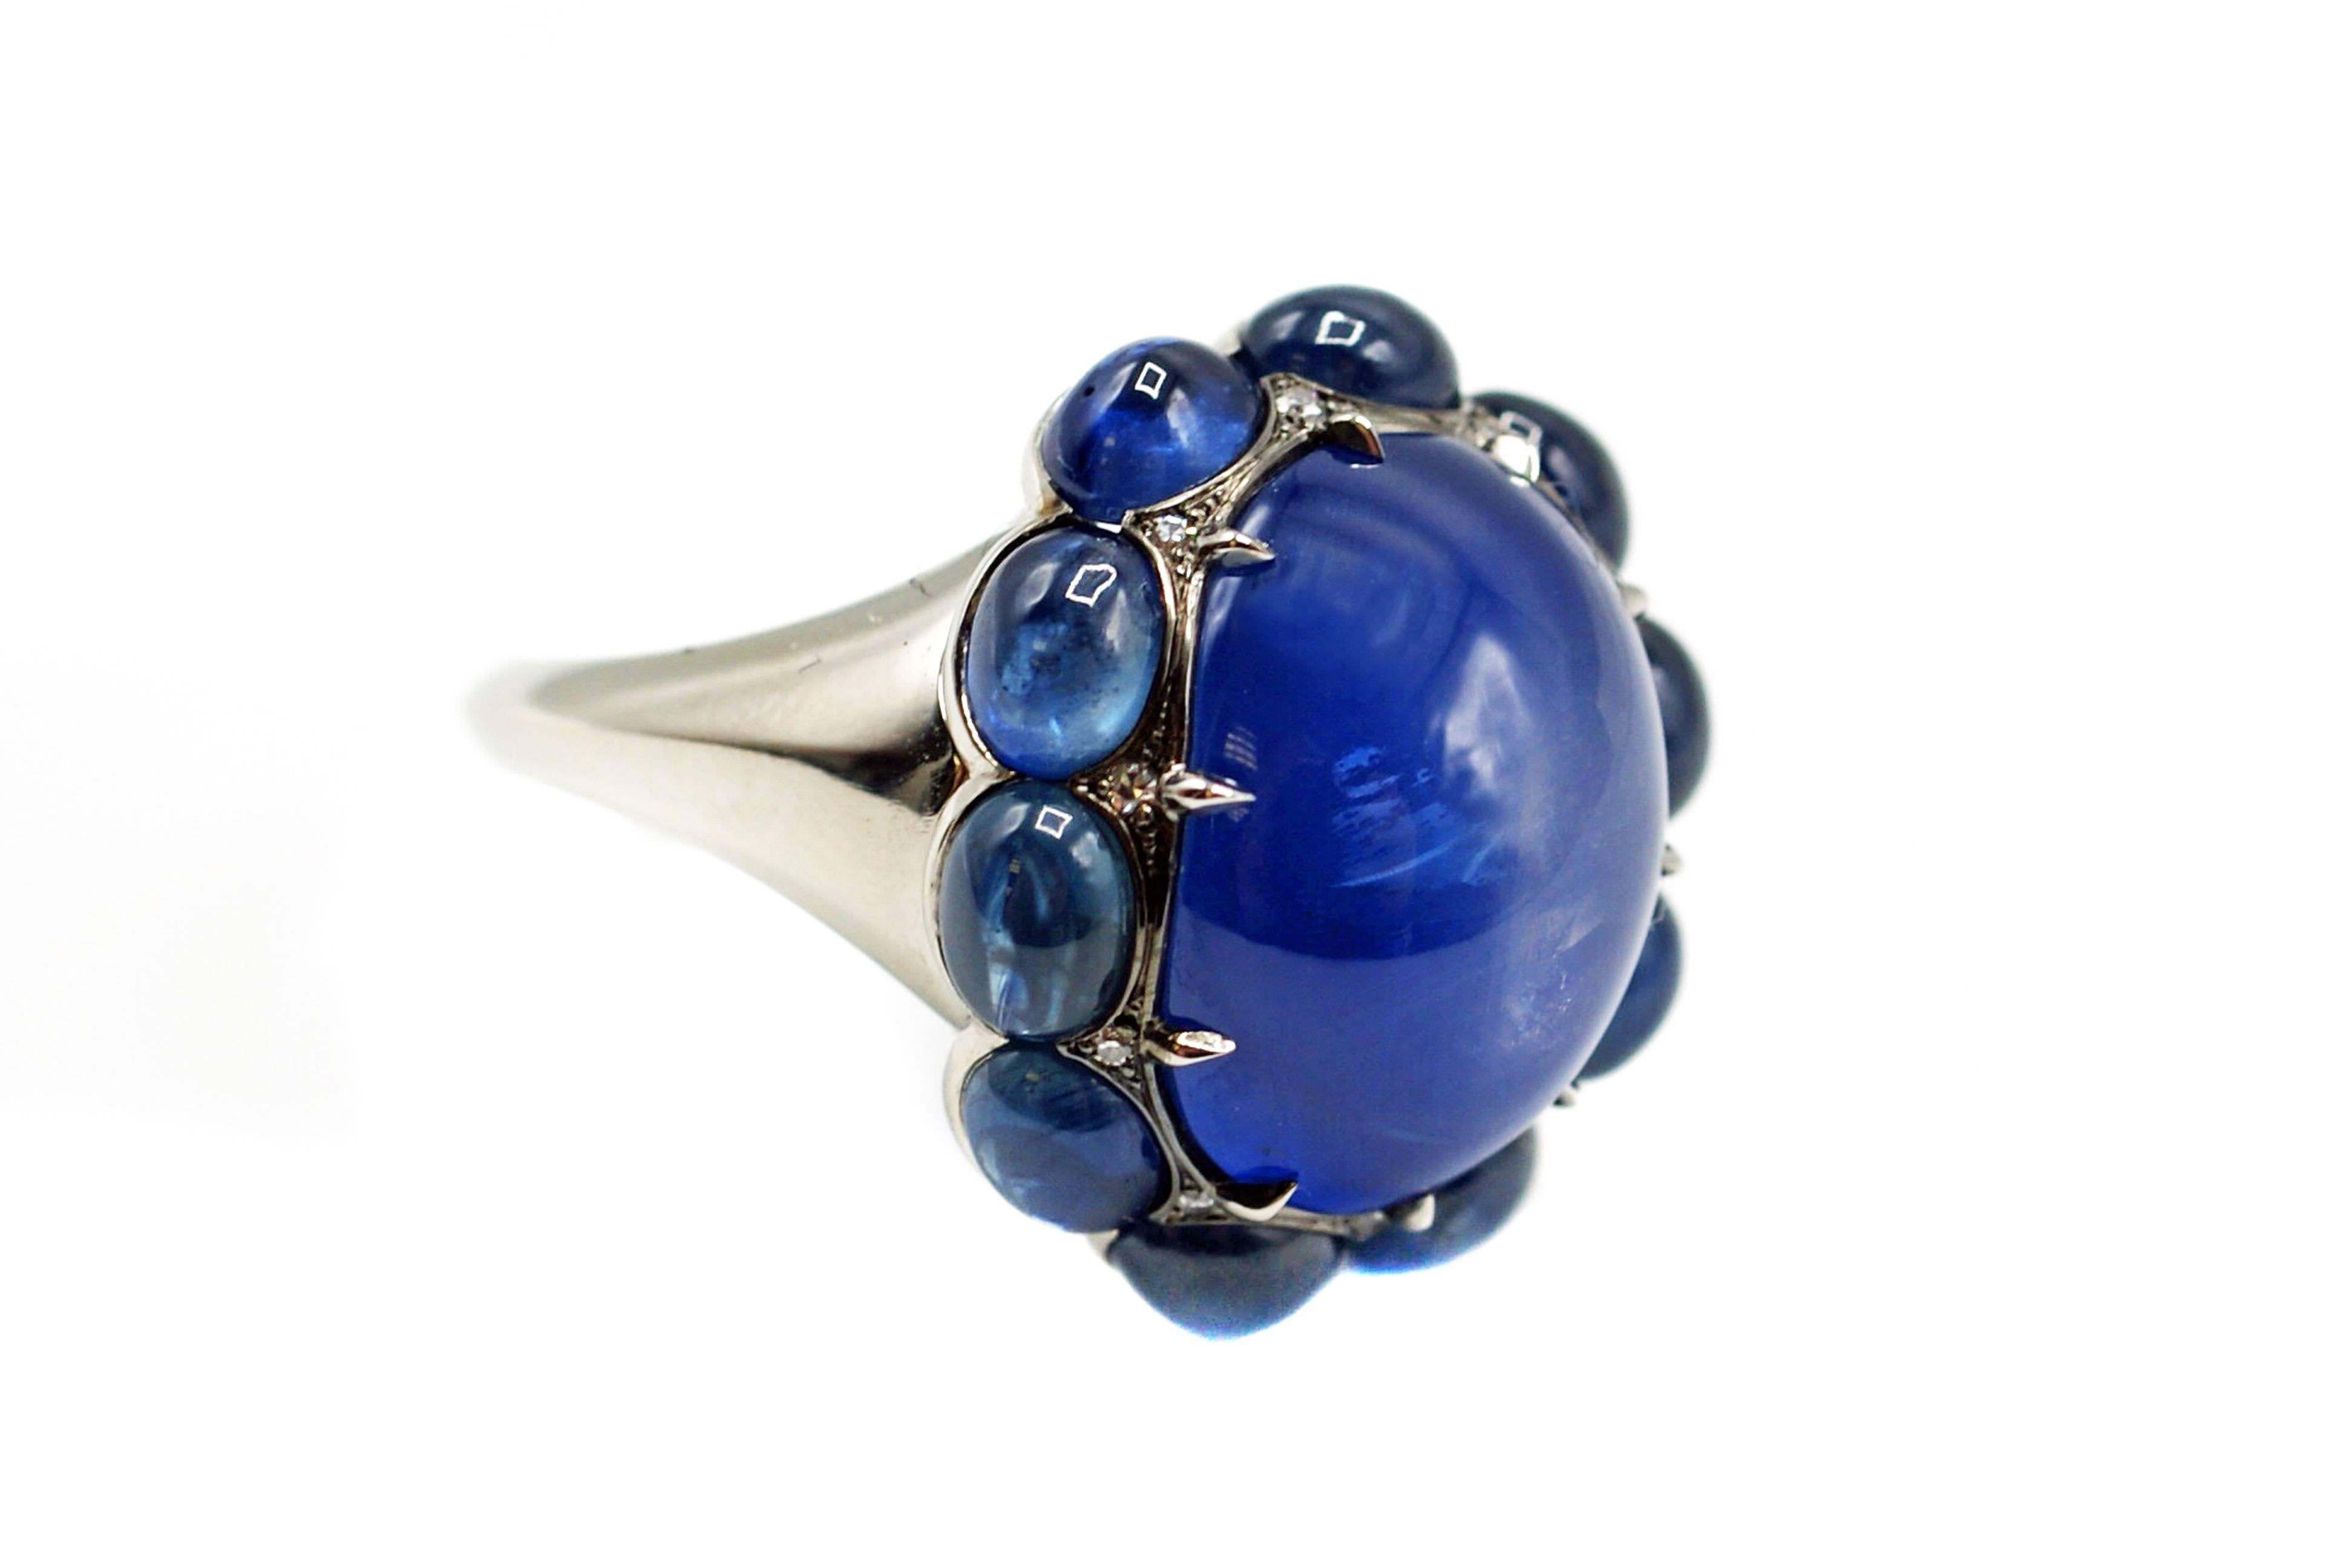 This exquisite unique ring, designed by Rive Gauche Jewelry was handcrafted in platinum by our master jewelers to reflect a contemporary and timeless chic. The center piece of this ring is a perfectly cut 21.36 carat rare Burma star sapphire with an